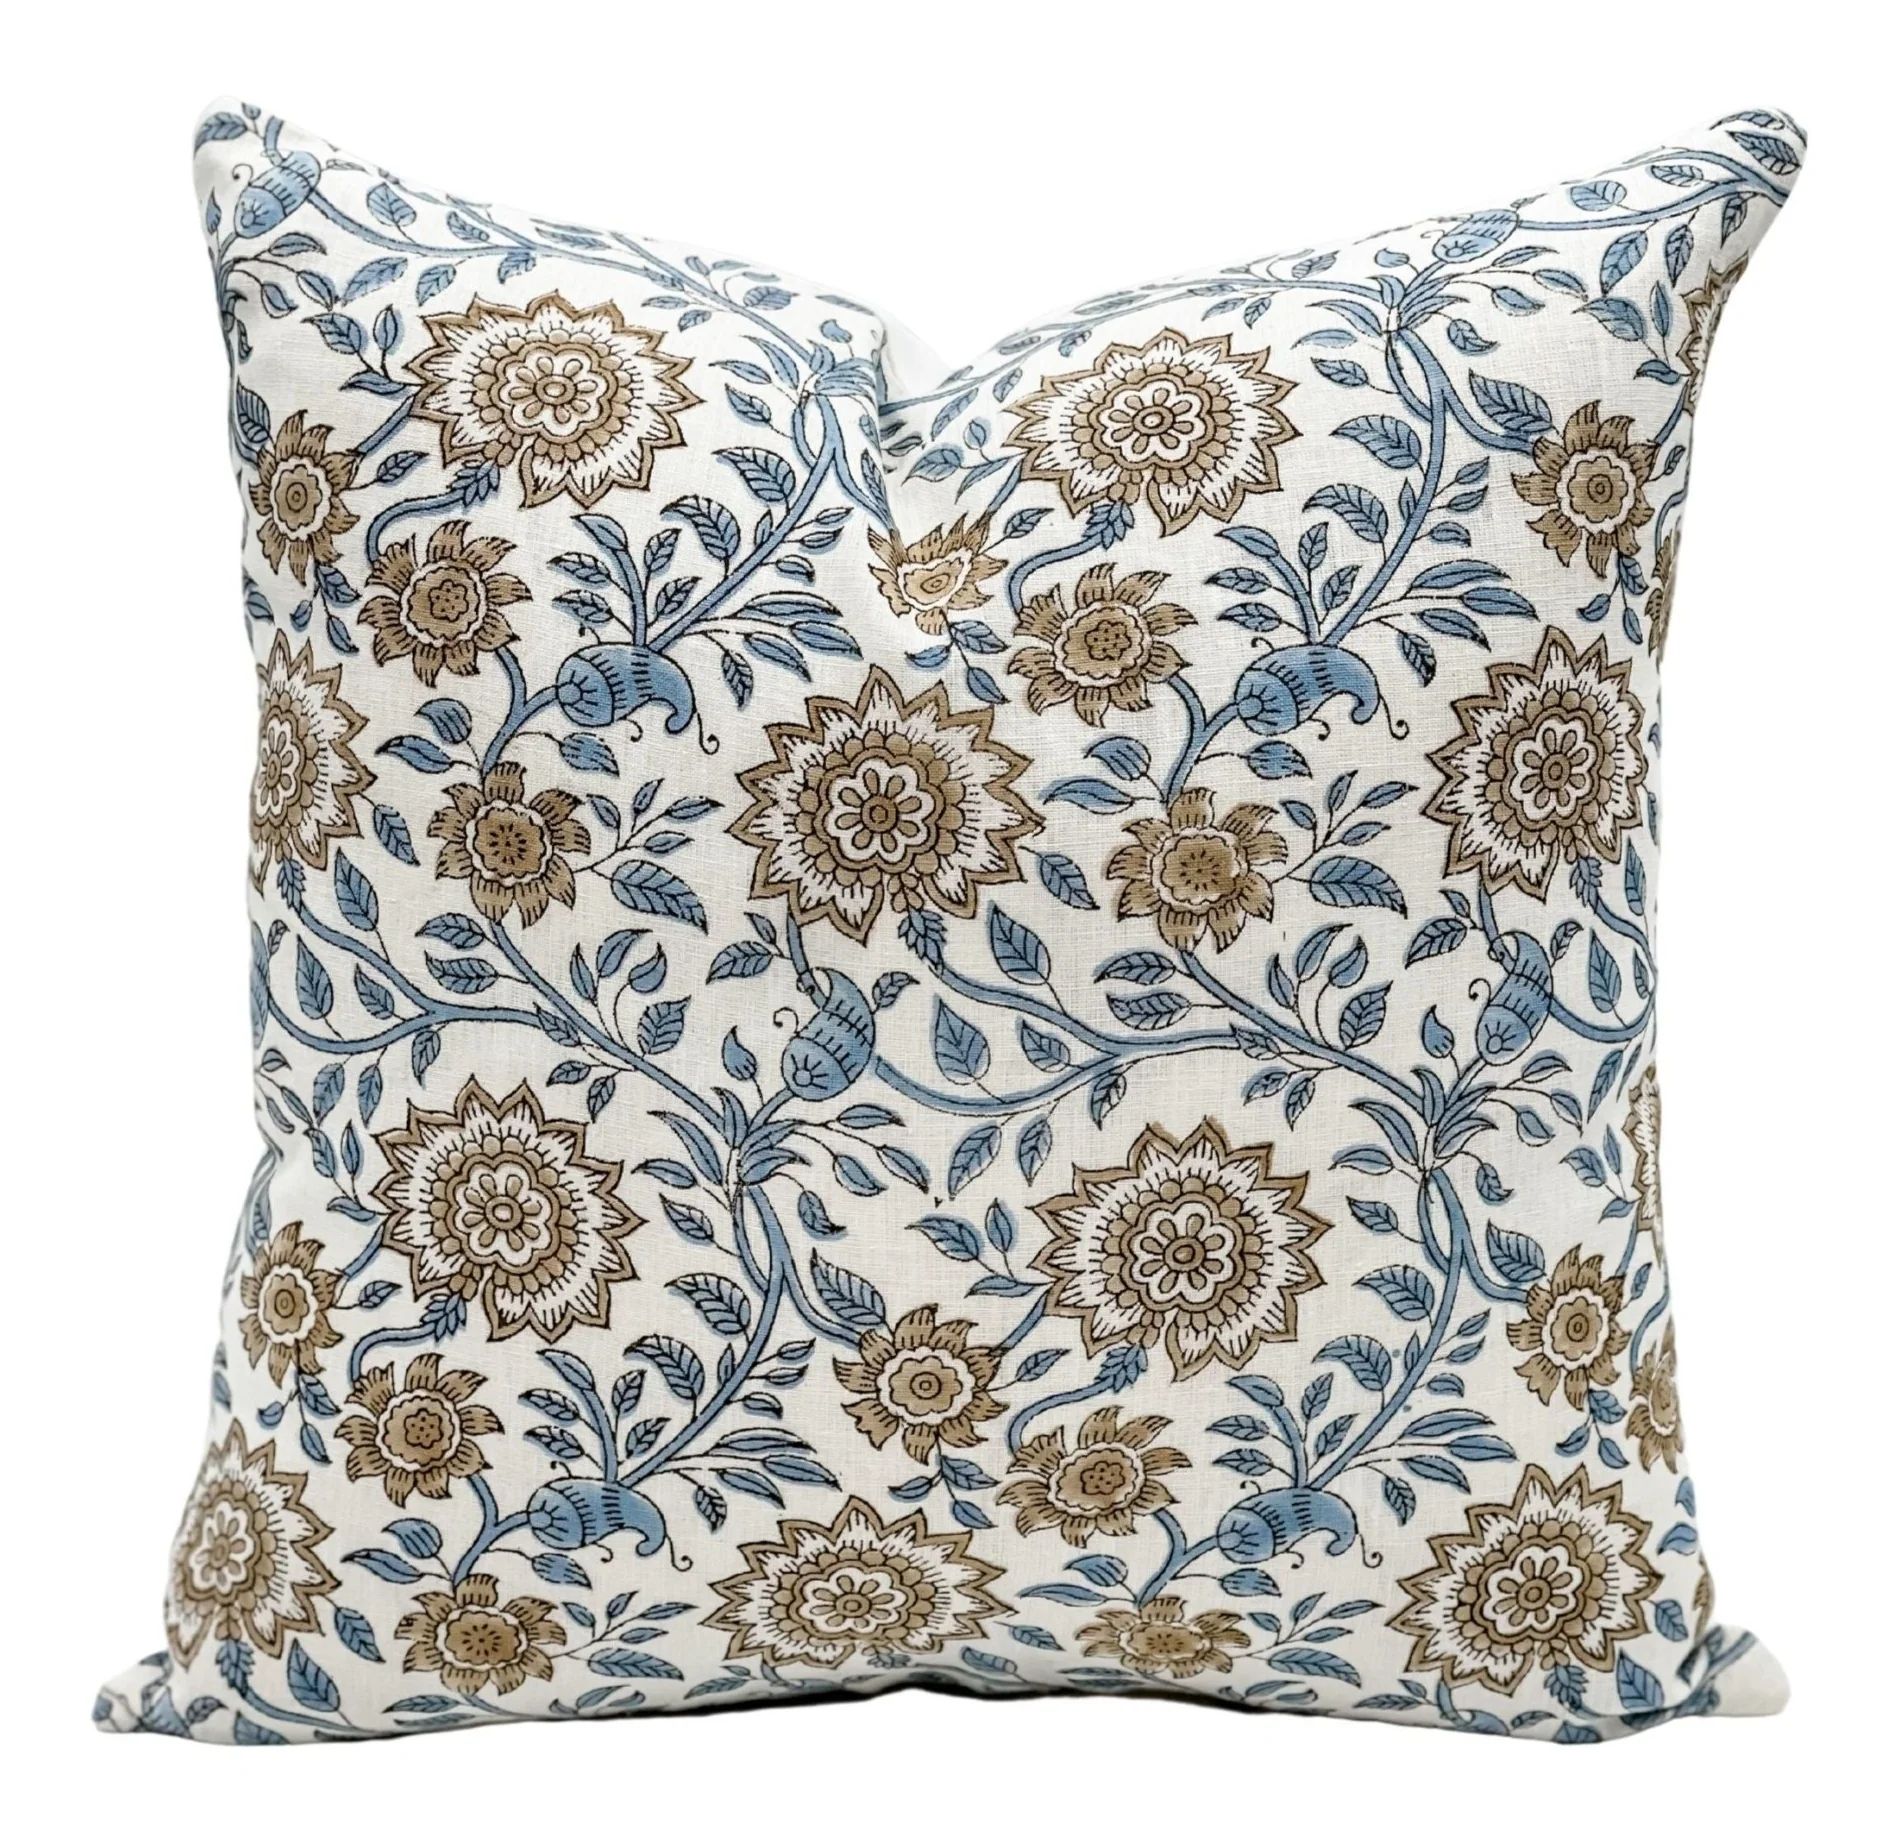 POINSETTIA IN LIGHT BLUE PILLOW COVER | Krinto